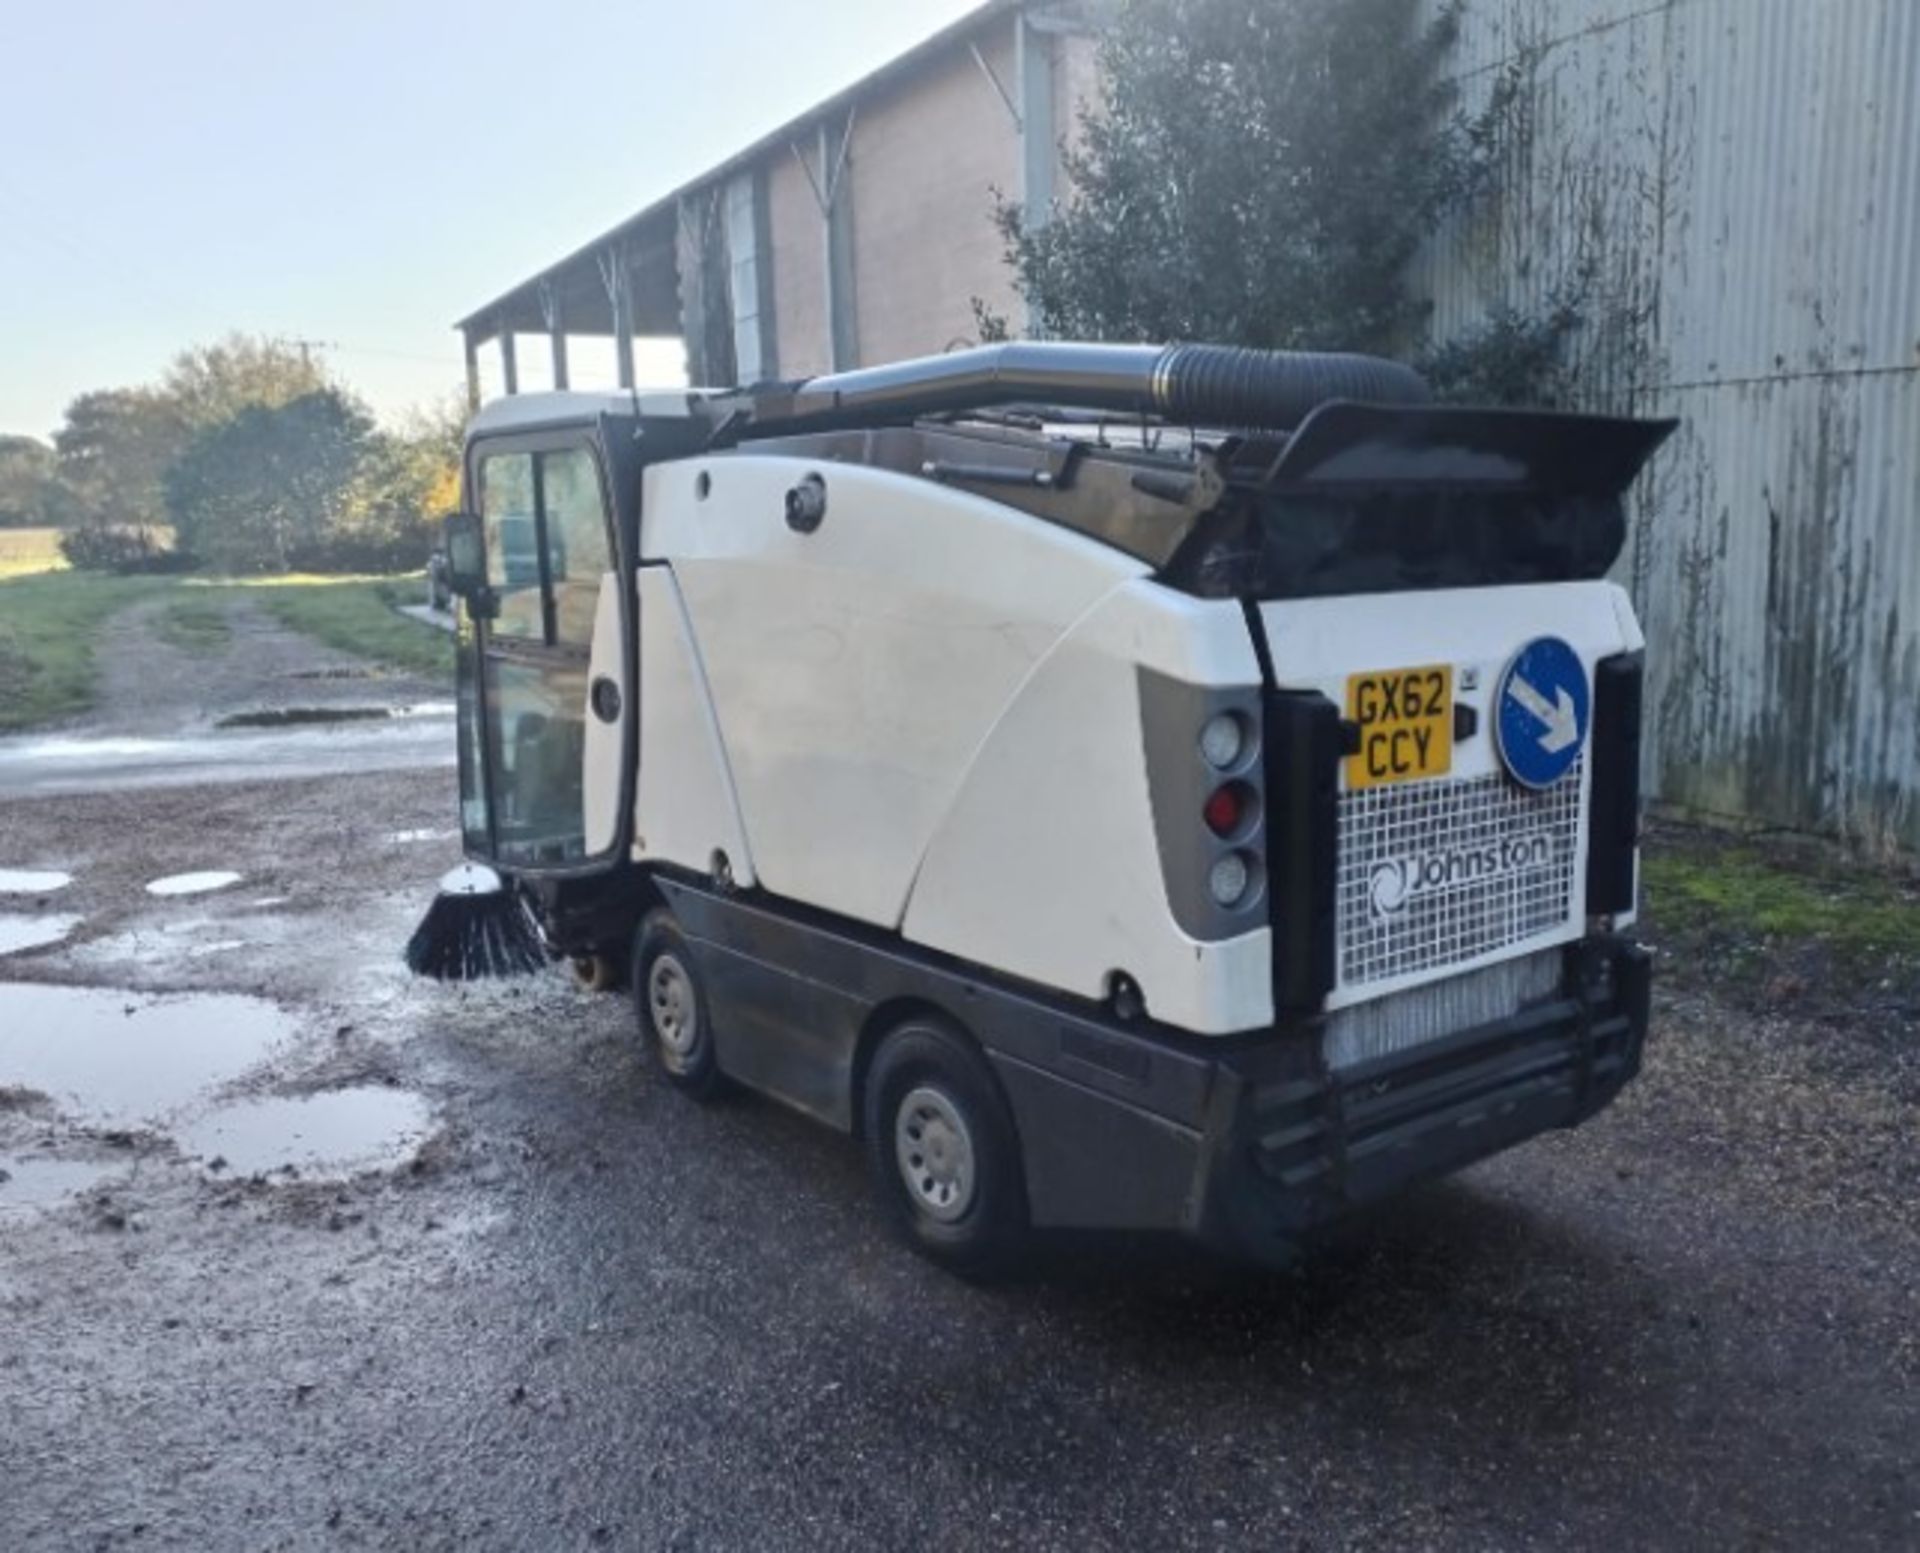 2013 JOHNSTON ROAD SWEEPER HYDROSTATIC - Image 2 of 6